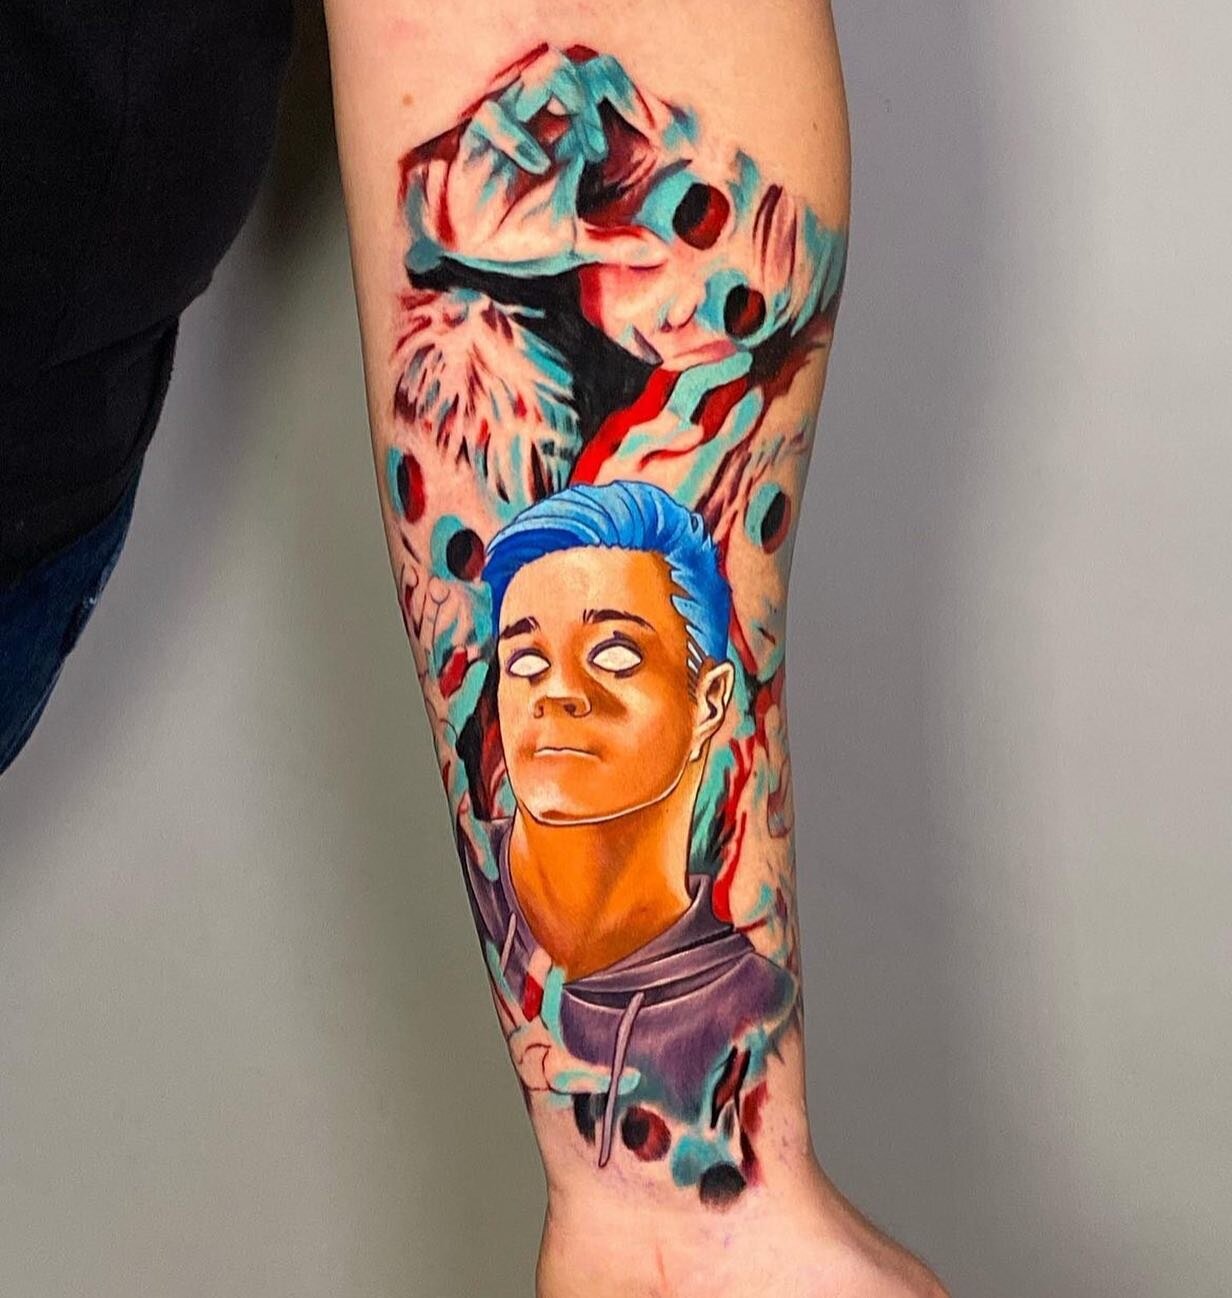 16 Incredible Nicktoons Tattoos Your Inner Child Will Love